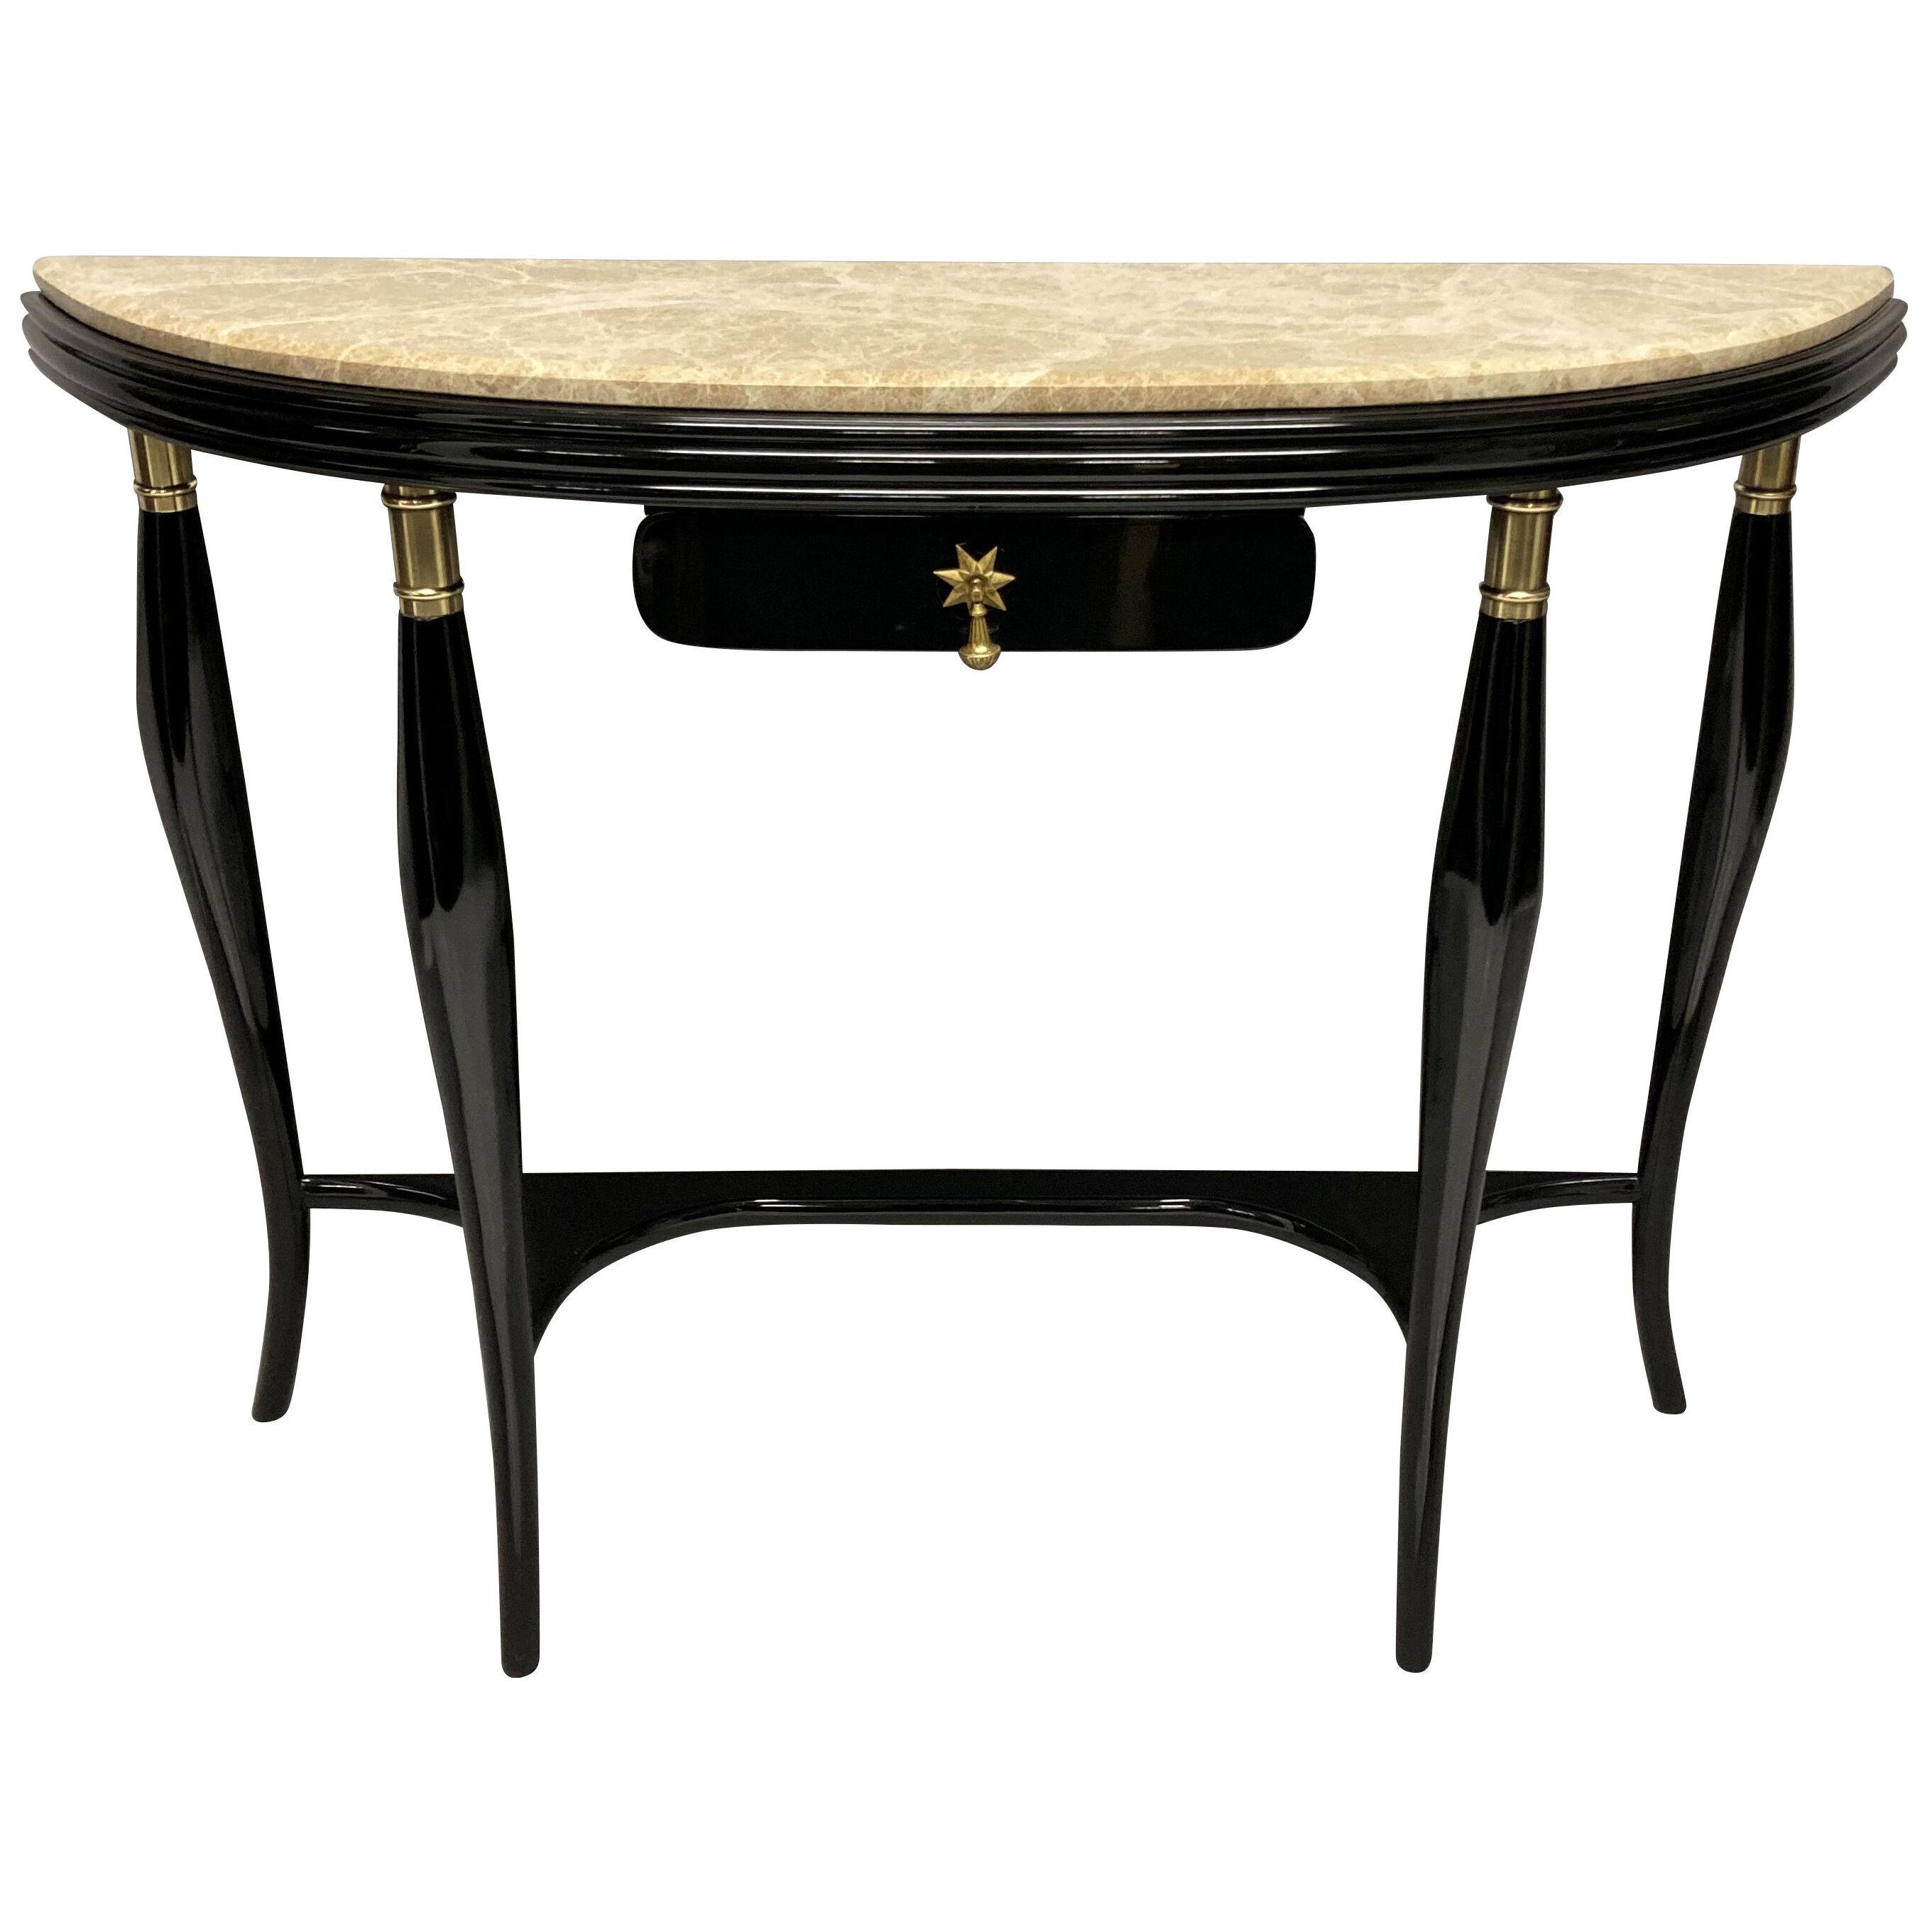 A STYLISH MID-CENTURY BLACK LACQUERED CONSOLE